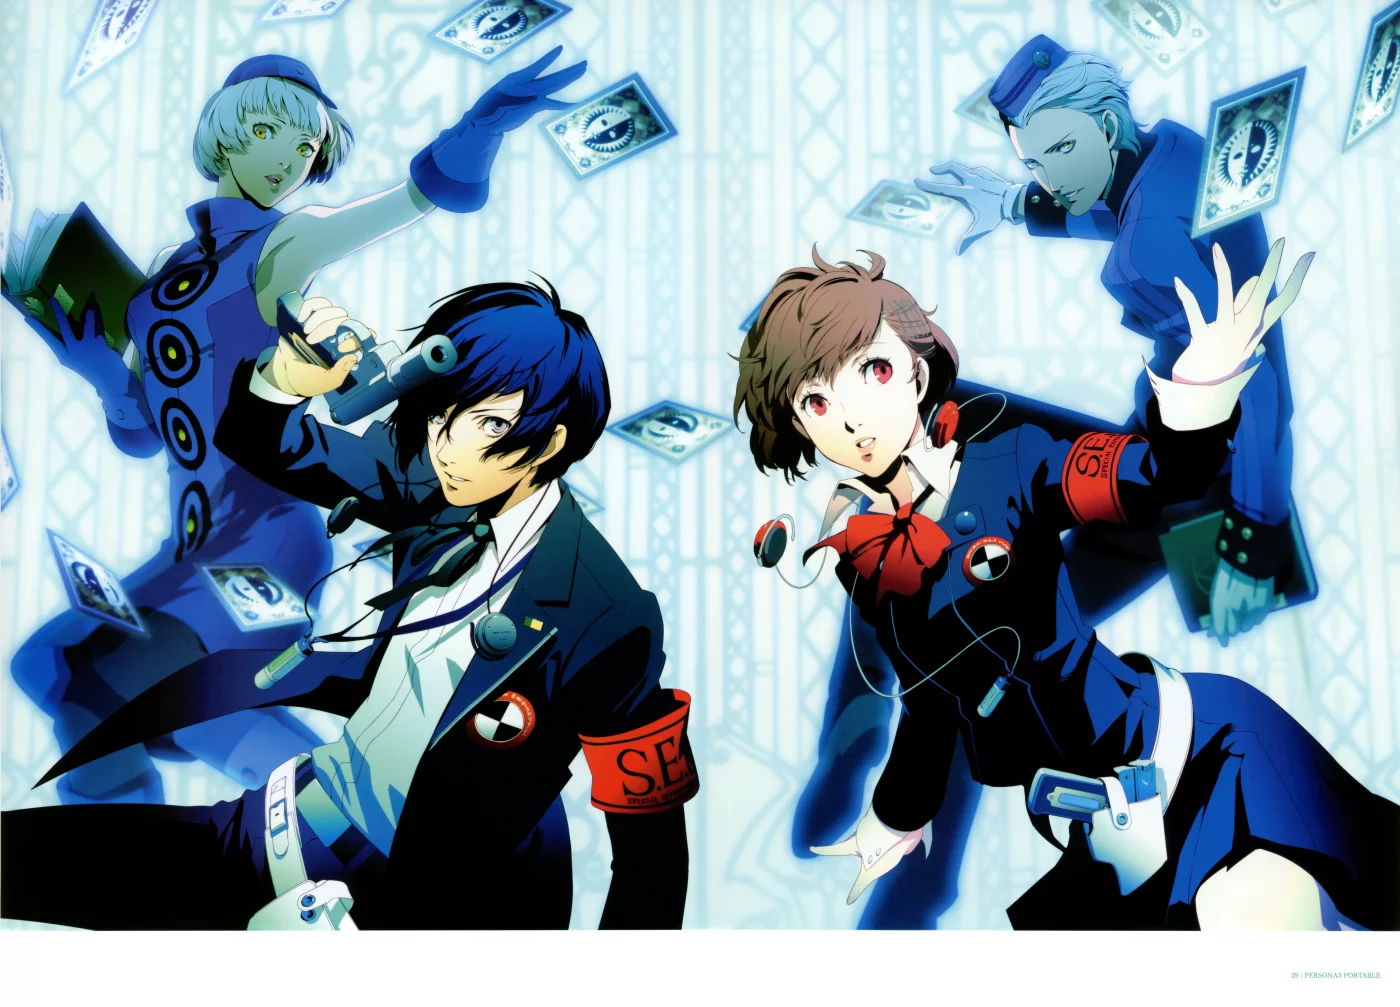 Persona 3 Answers you Need, to be a Genius